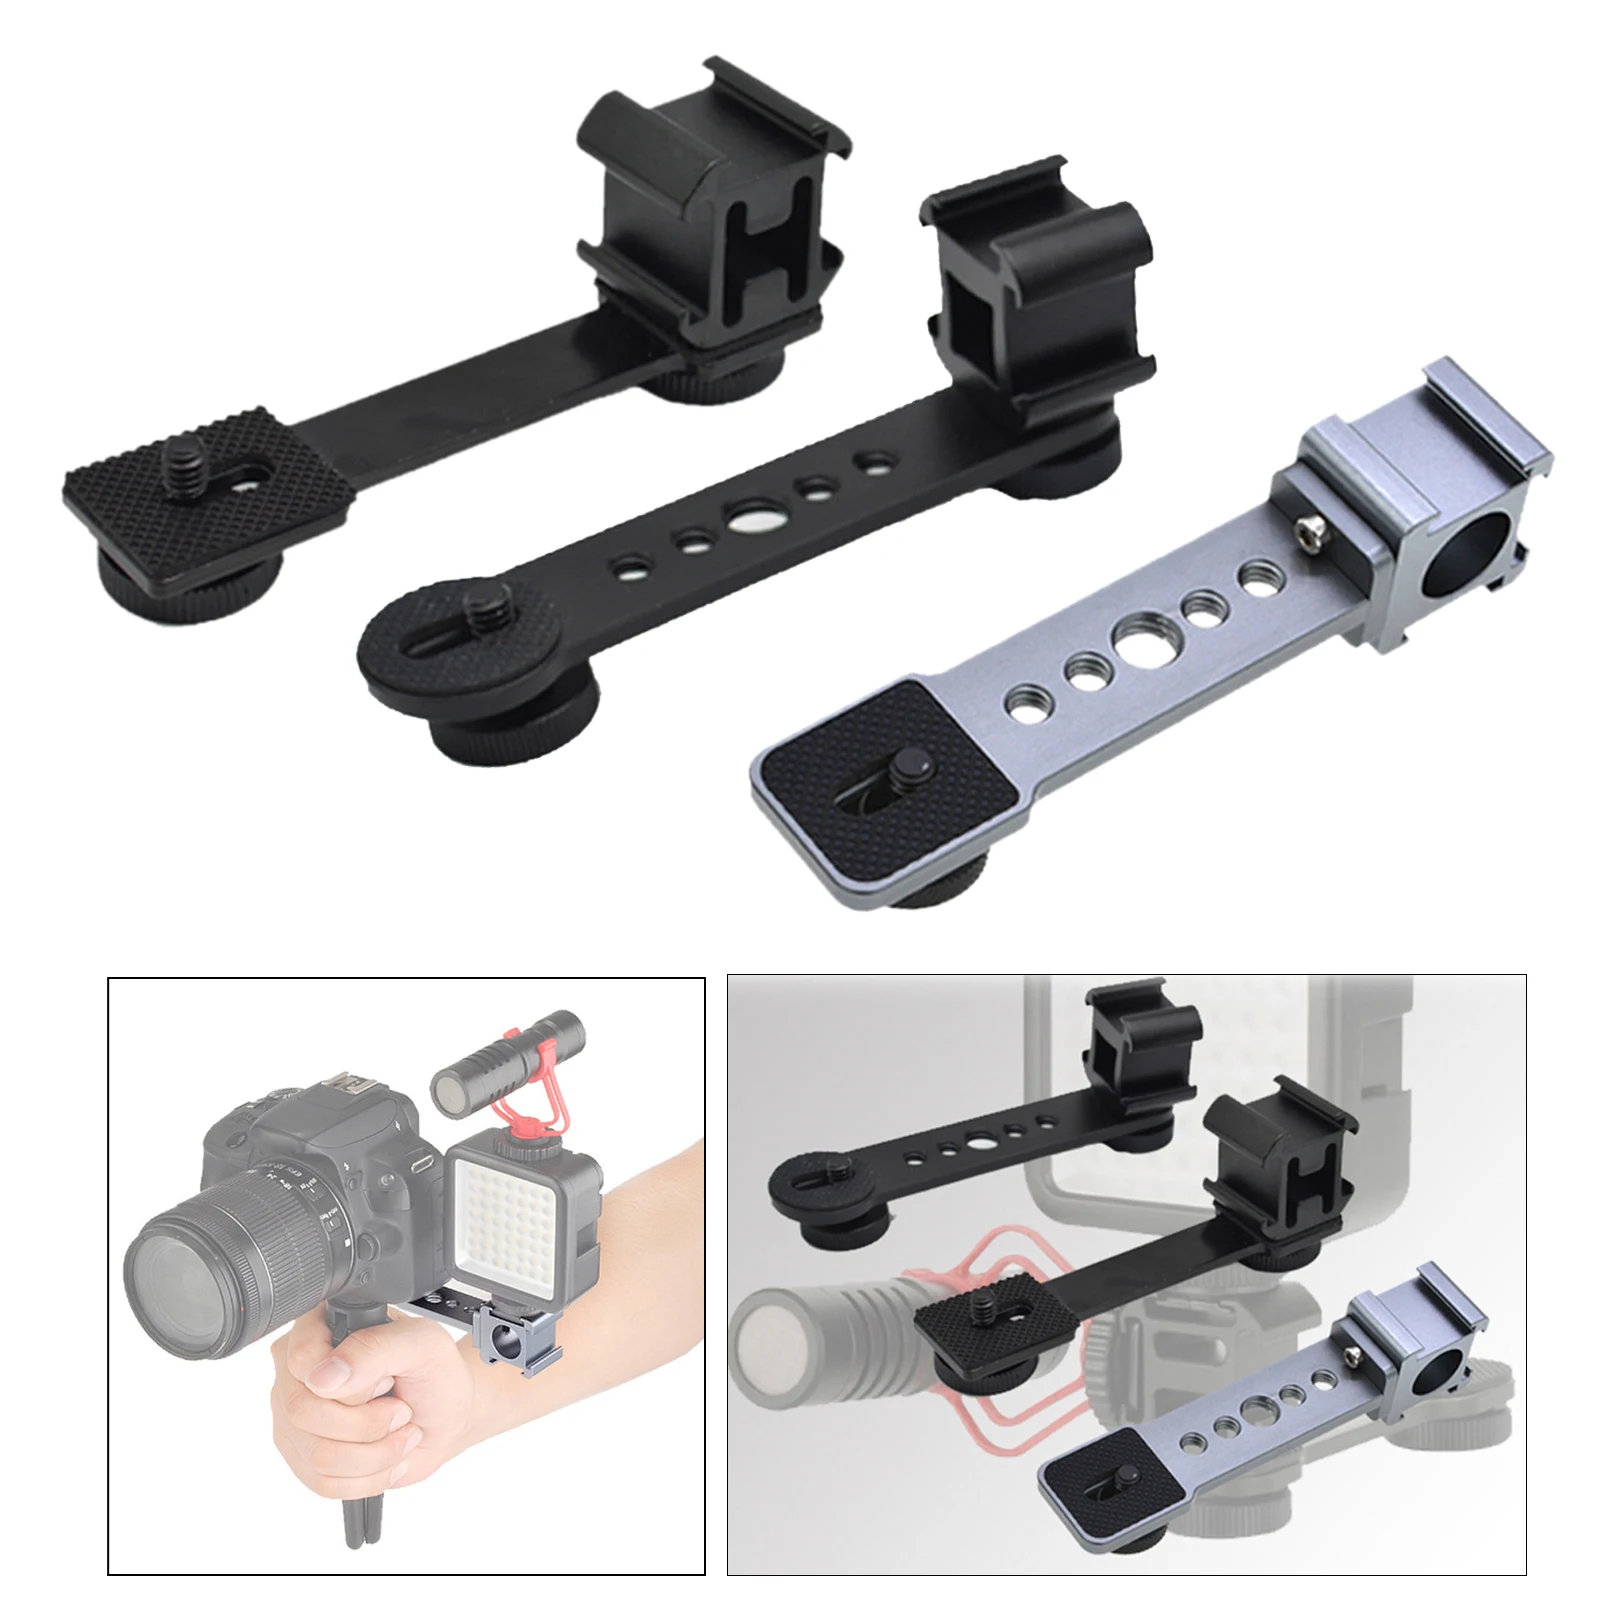 Triple Cold Shoe Extension Bar, Microphone Mount Extension Bar Bracket with 1/4 Adapter Compatible for